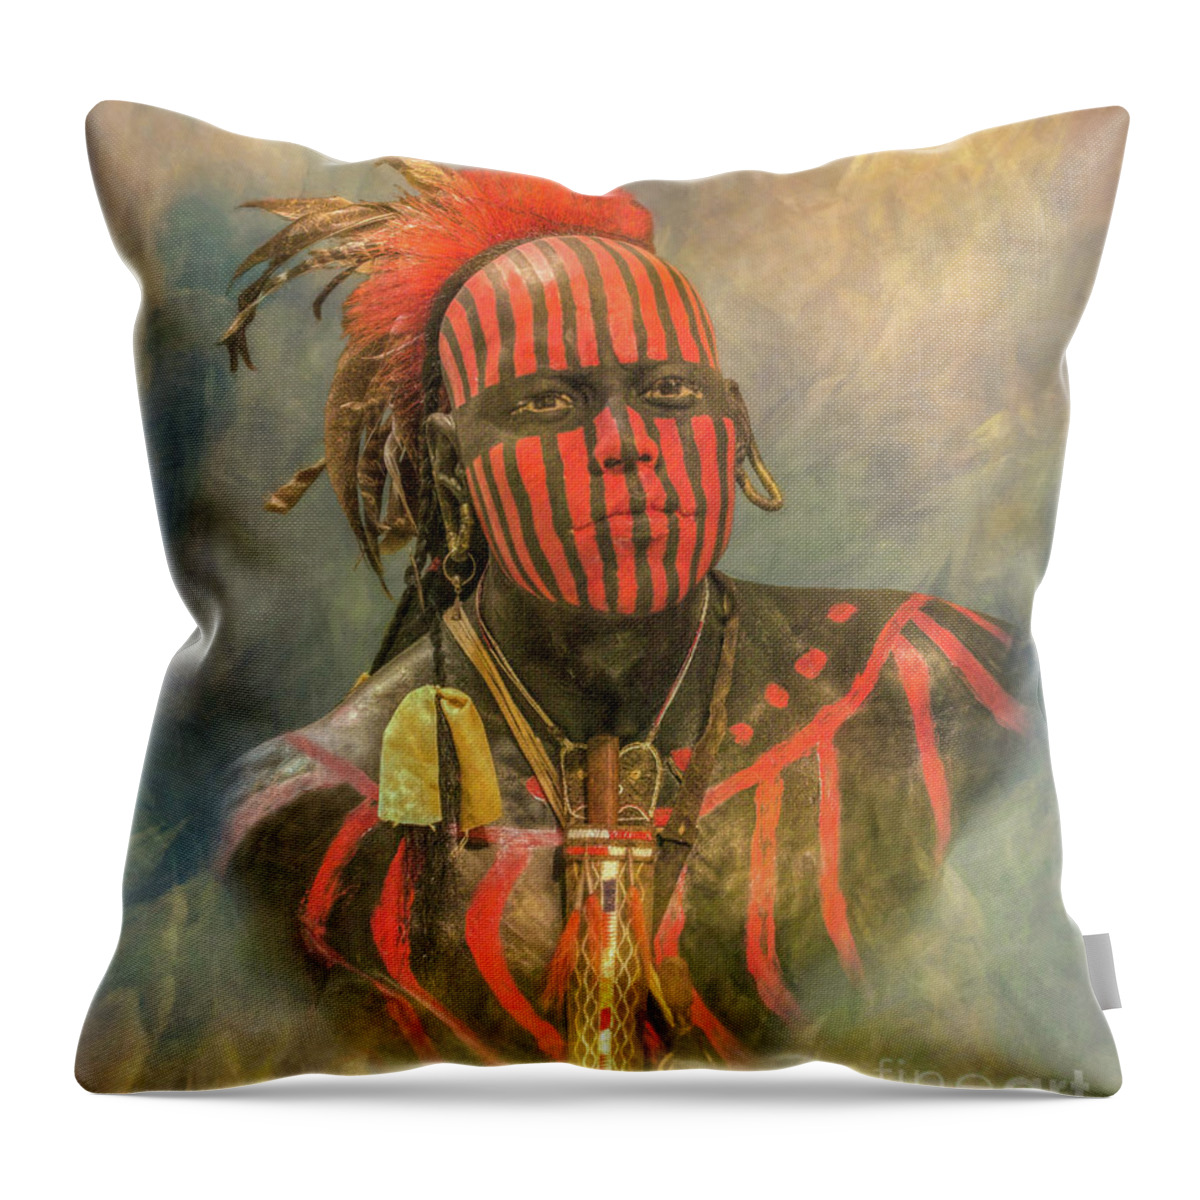 Portrait Of A Warrior Throw Pillow featuring the digital art Portrait of a Warrior by Randy Steele